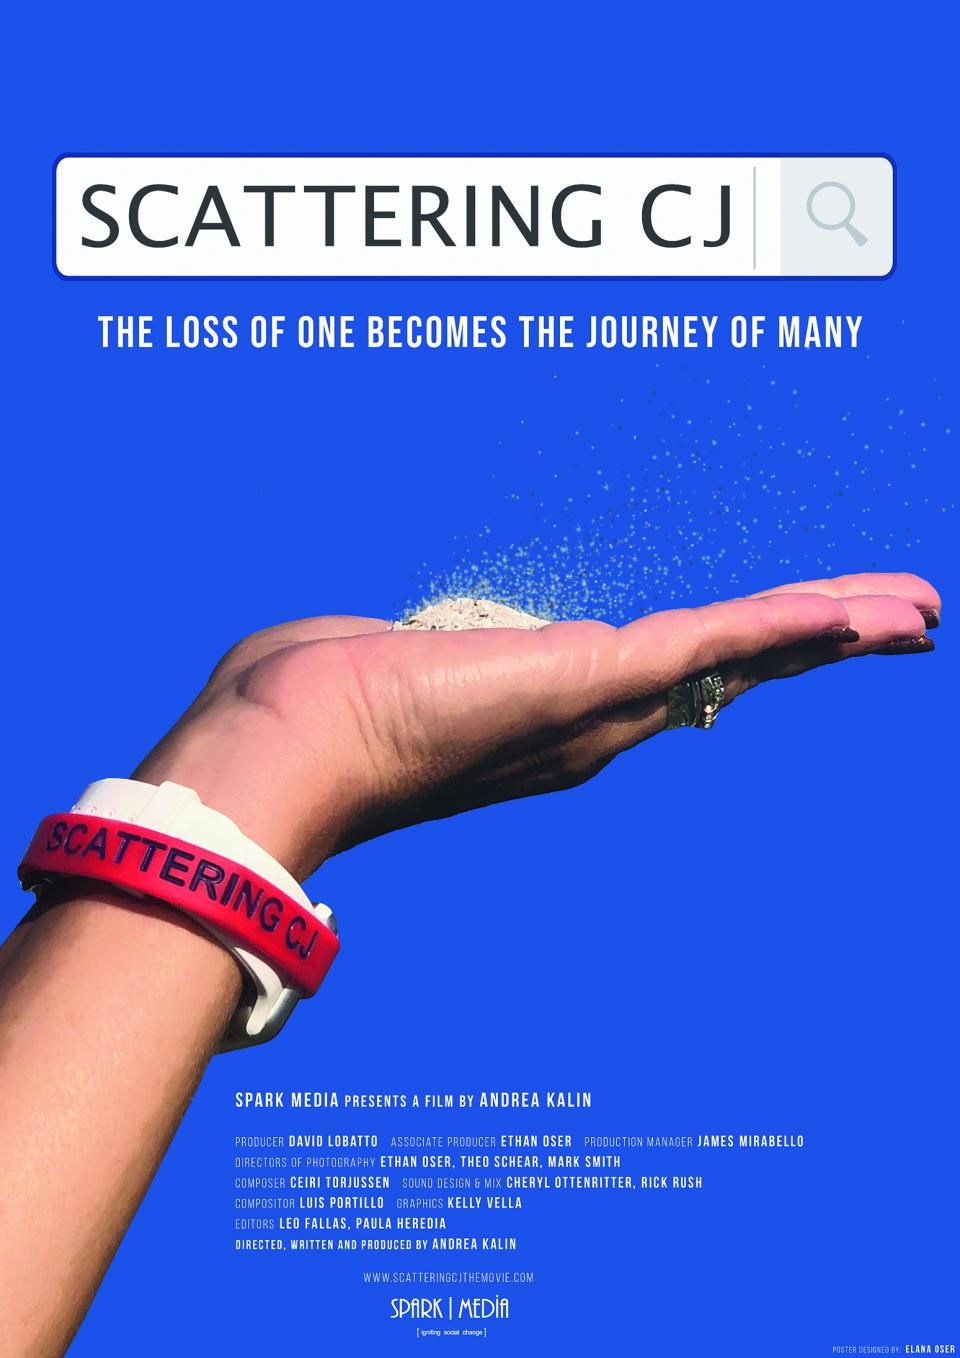 Scattering CJ poster of hand with ashes